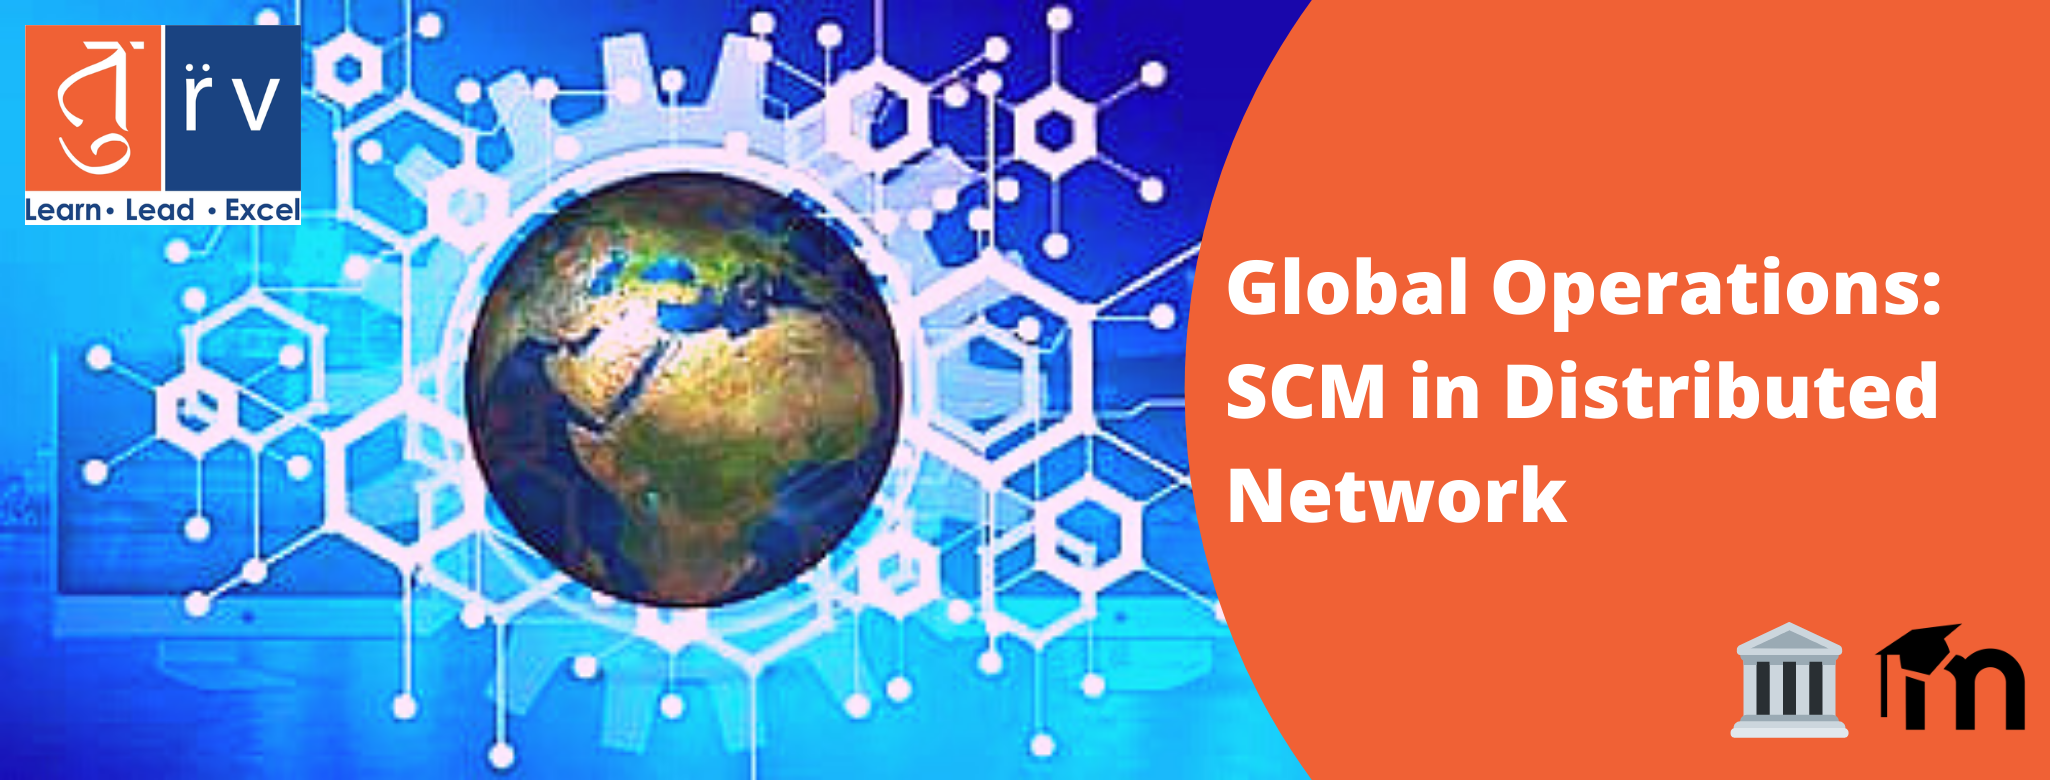 Global Operations and SCM in Distributed Network